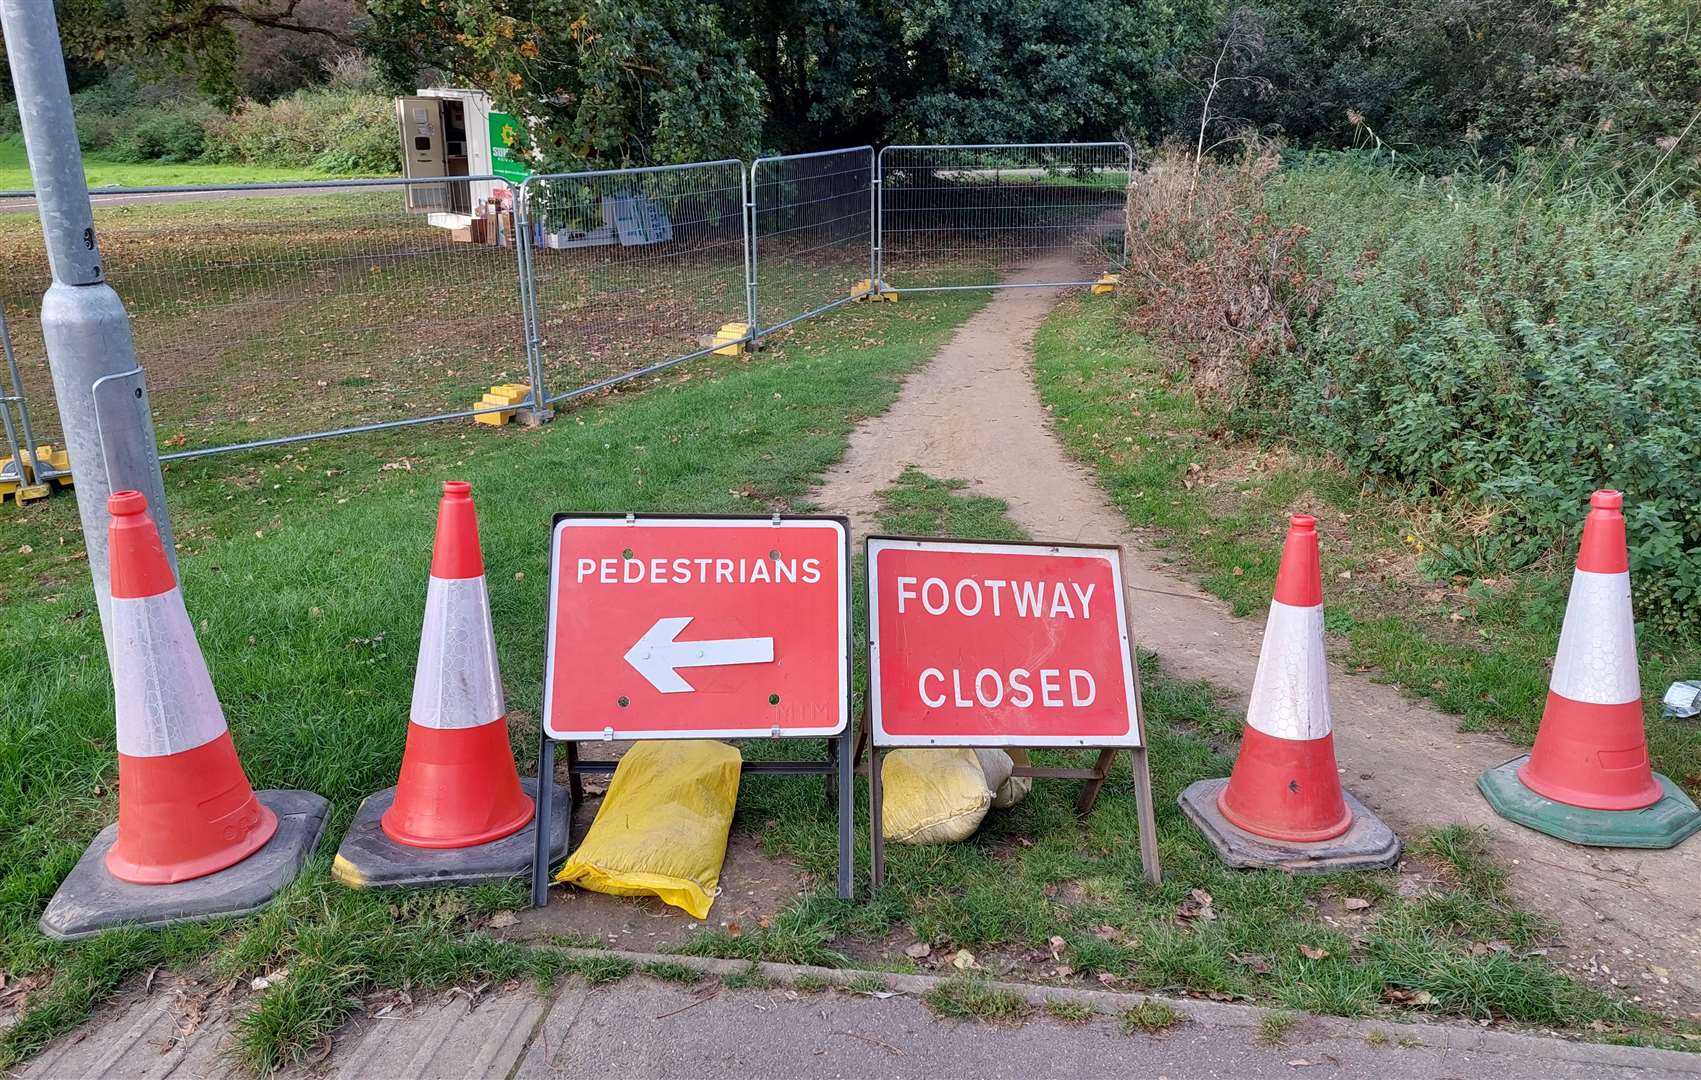 The footpath will be closed until the end of the year